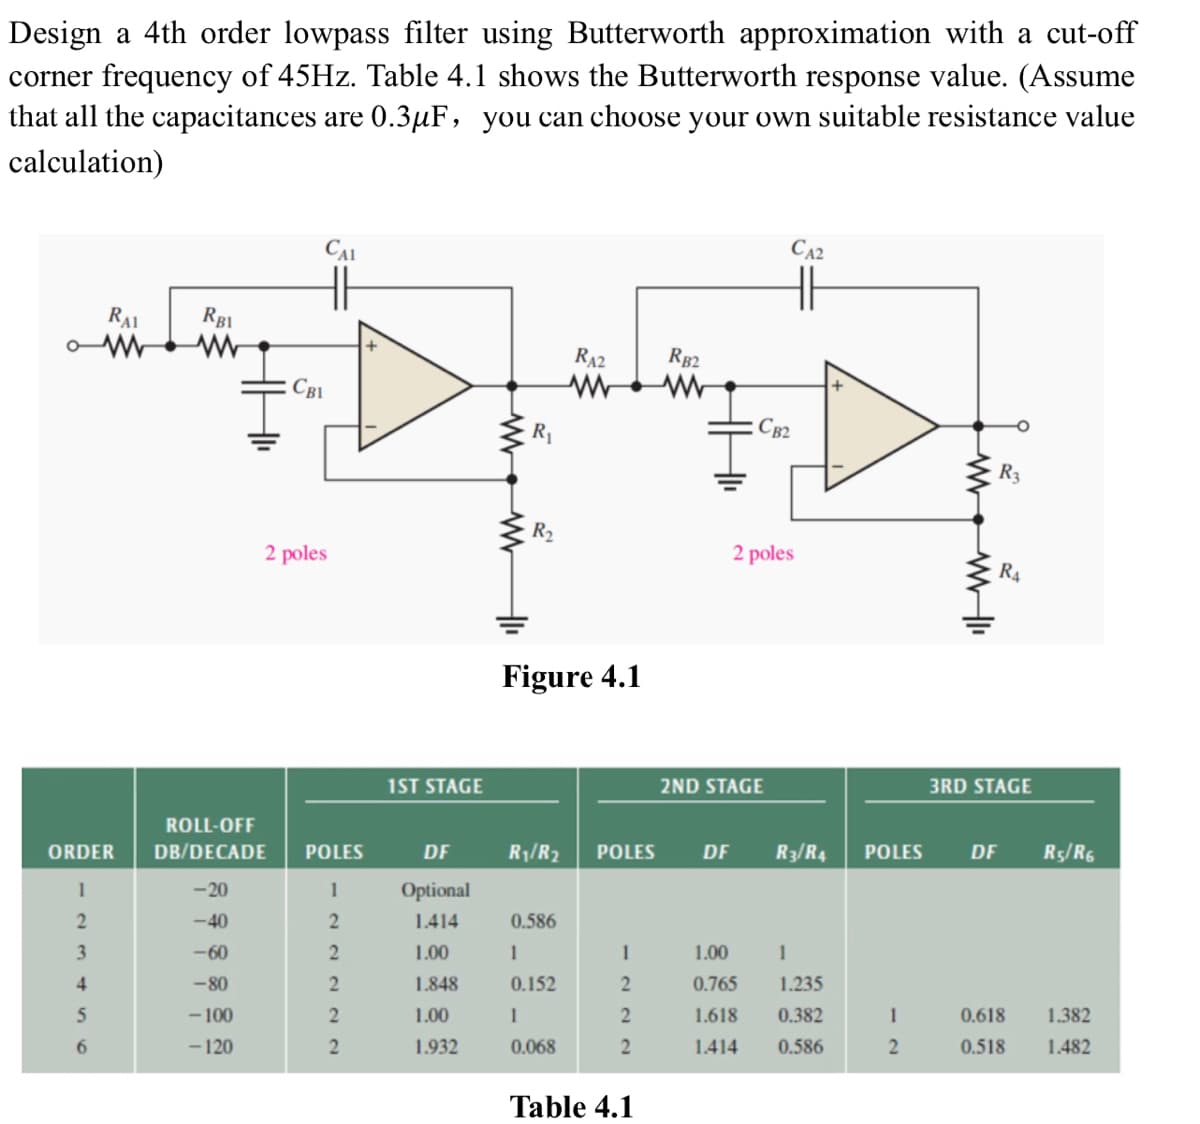 Design a 4th order lowpass filter using Butterworth approximation with a cut-off
corner frequency of 45Hz. Table 4.1 shows the Butterworth response value. (Assume
that all the capacitances are 0.3μF, you can choose your own suitable resistance value
calculation)
RAI
ORDER
1
2
3
4
5
6
RB1
www
ROLL-OFF
DB/DECADE
-20
-40
-60
-80
-100
- 120
CB1
CAL
2 poles
POLES
1
2
2
2
2
2
1ST STAGE
DF
Optional
1.414
1.00
1.848
1.00
1.932
www
R₁
R₂
RA2
Figure 4.1
R₁/R₂ POLES
0.586
1
0.152
1
0.068
1
2
2
2
Table 4.1
RB2
www
CA2
CB2
2 poles
2ND STAGE
DF R3/R4
1.00
1
0.765
1.235
1.618
0.382
1.414 0.586
POLES
1
2
www
www-li
R3
R4
3RD STAGE
DF R5/R6
0.618 1.382
0.518
1.482